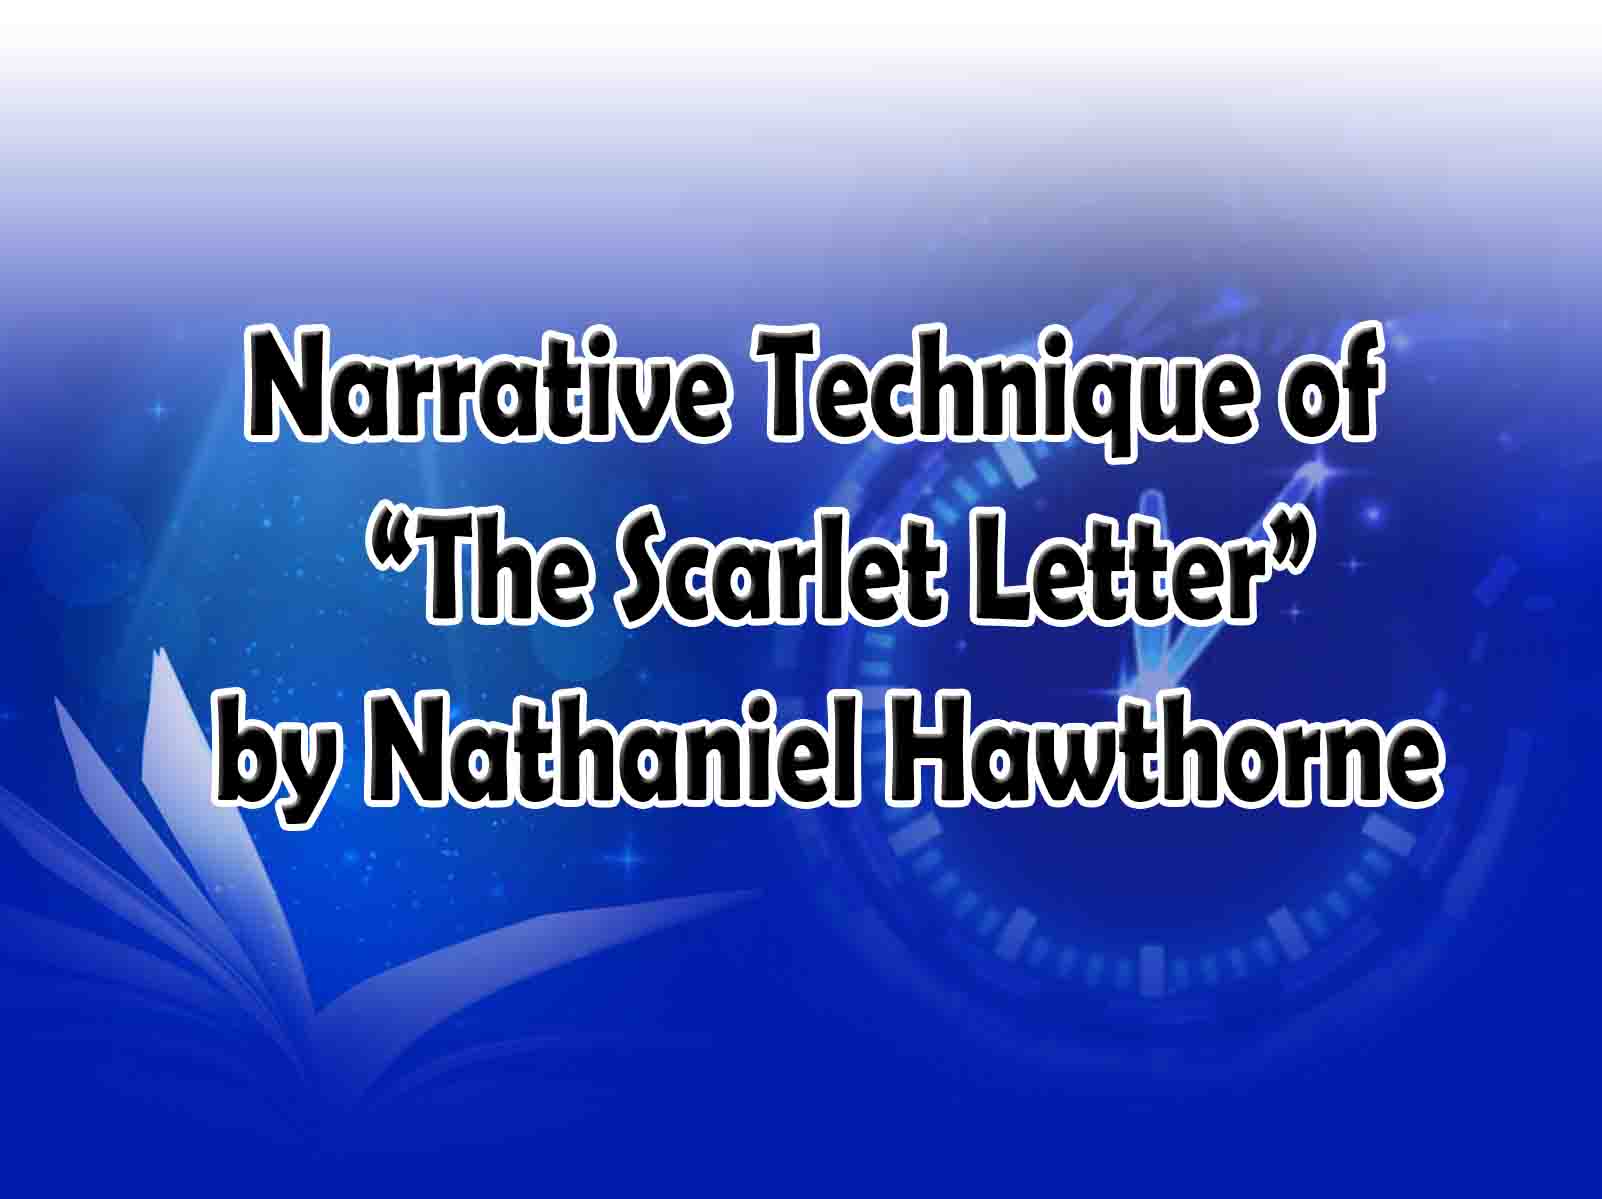 Narrative Technique of “The Scarlet Letter” by Nathaniel Hawthorne